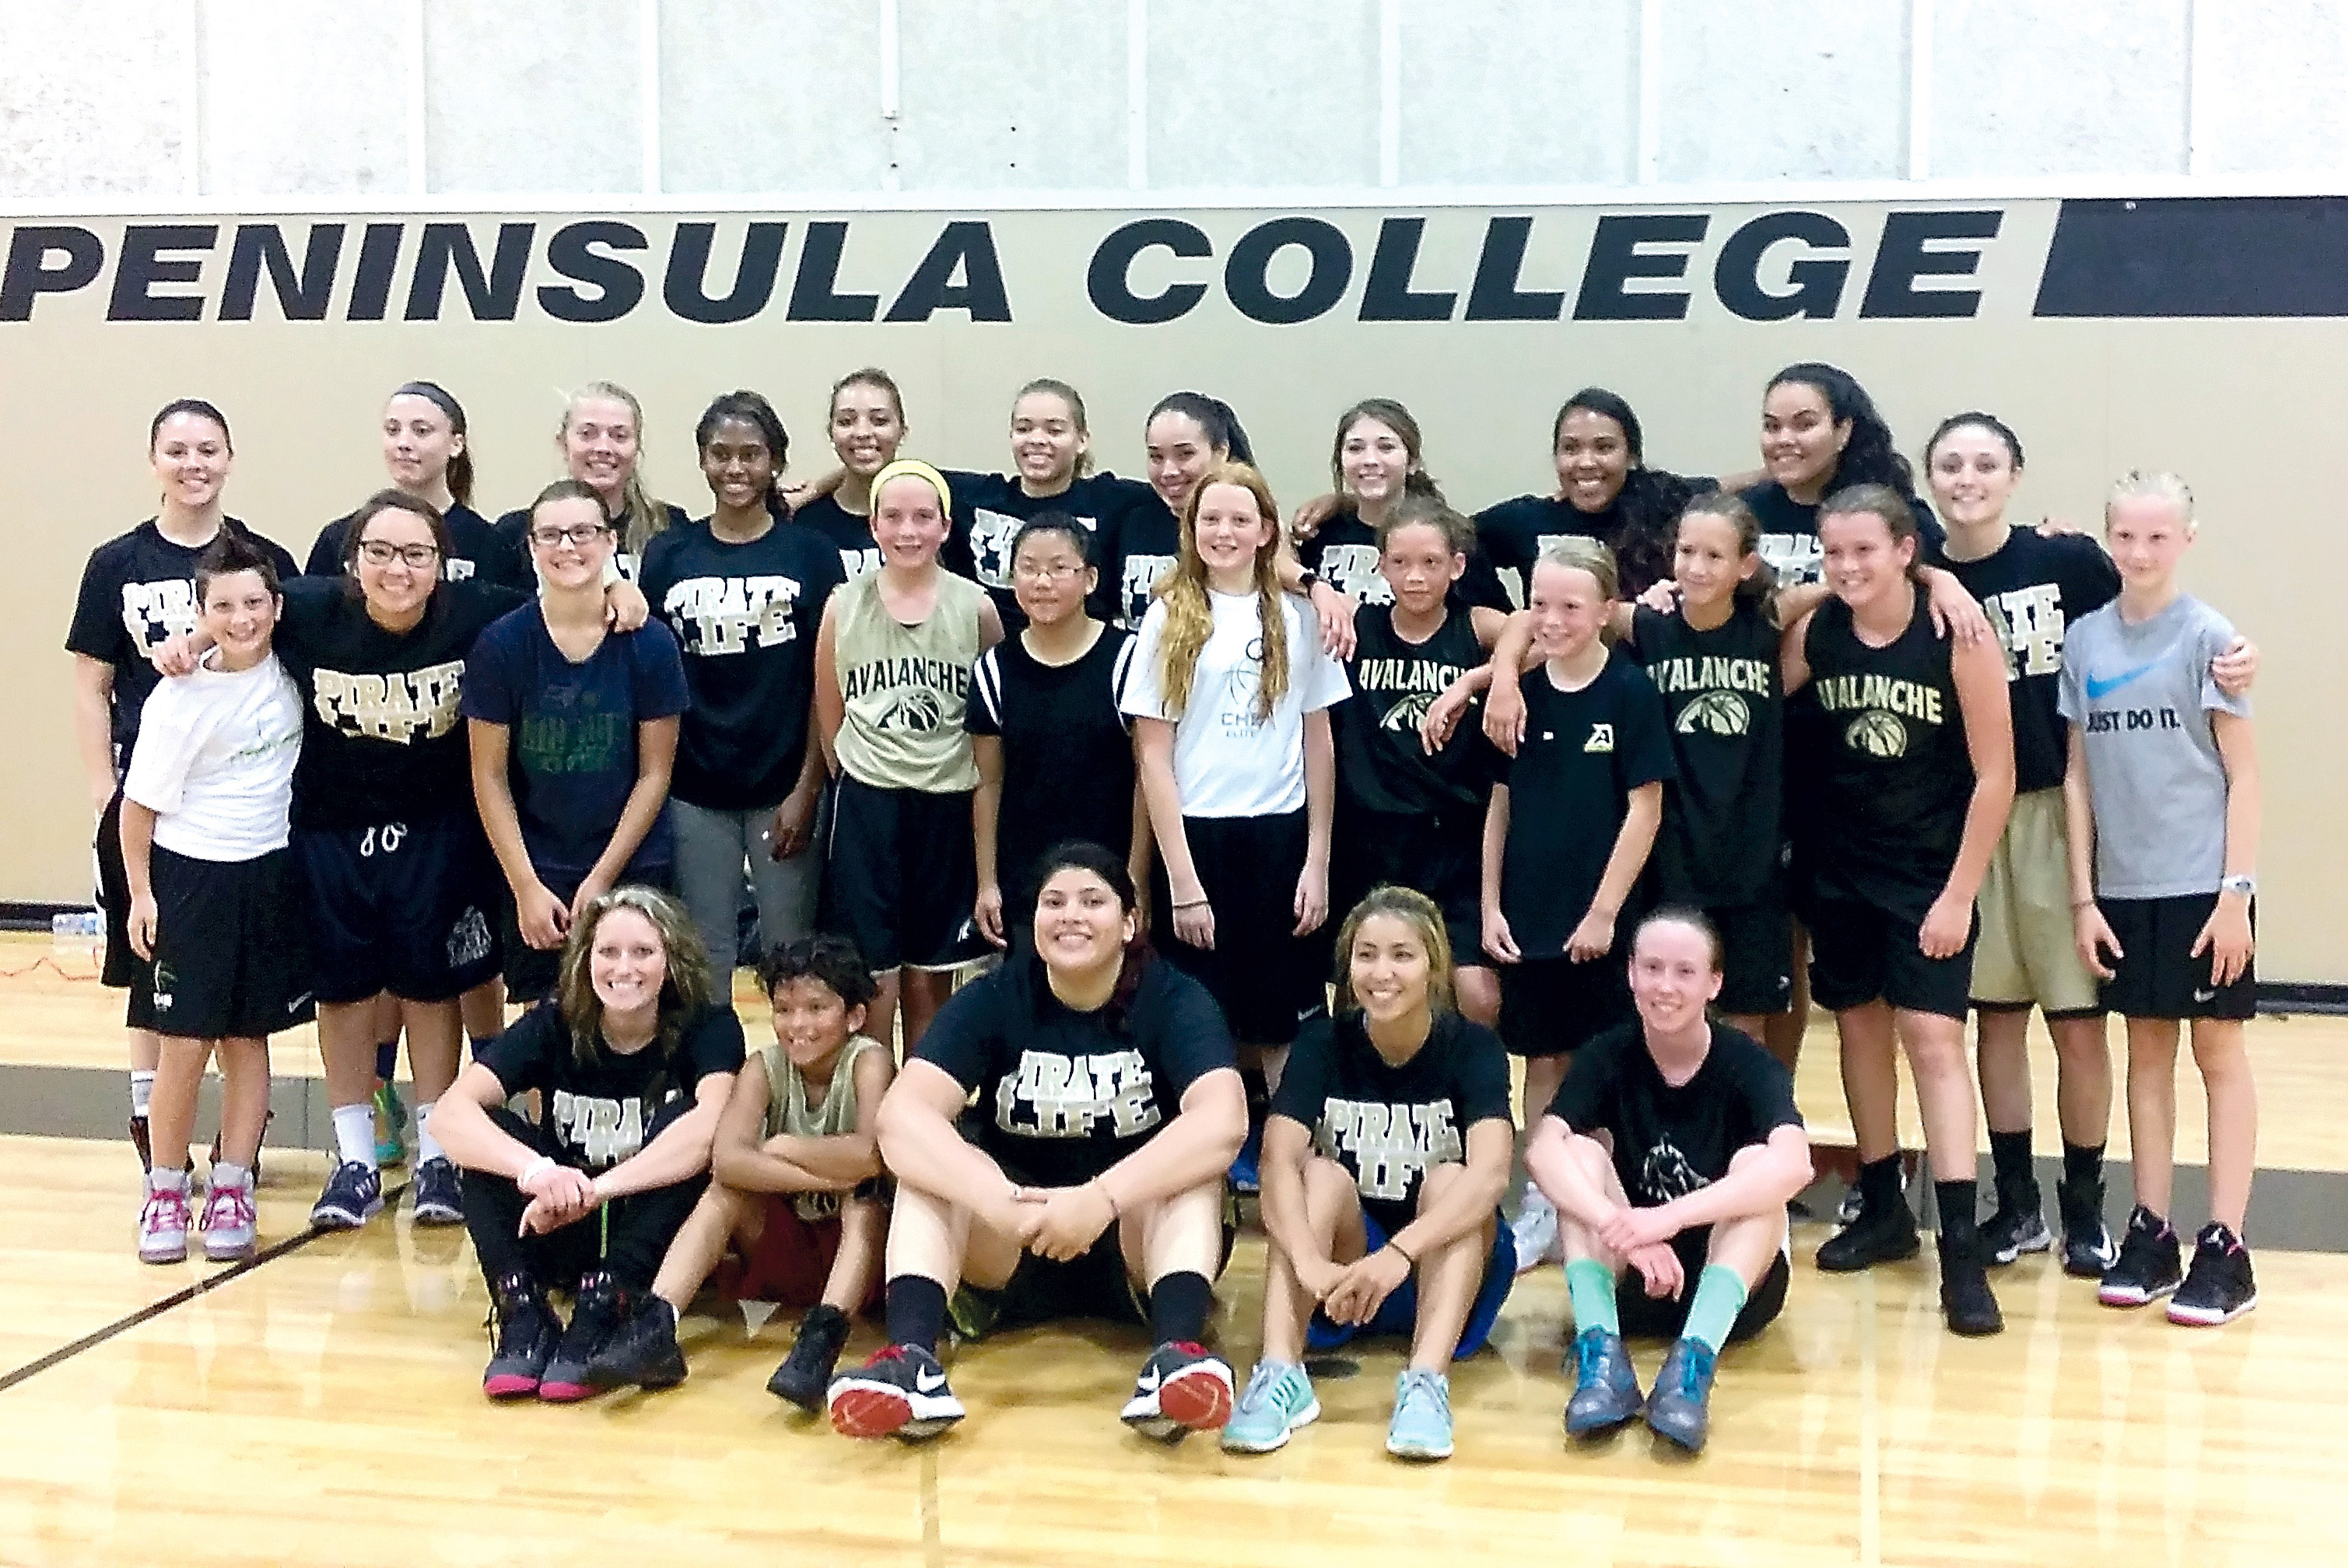 The Peninsula College women's basketball team has already started this year's Pirate Pals mentoring program with younger players from the area.